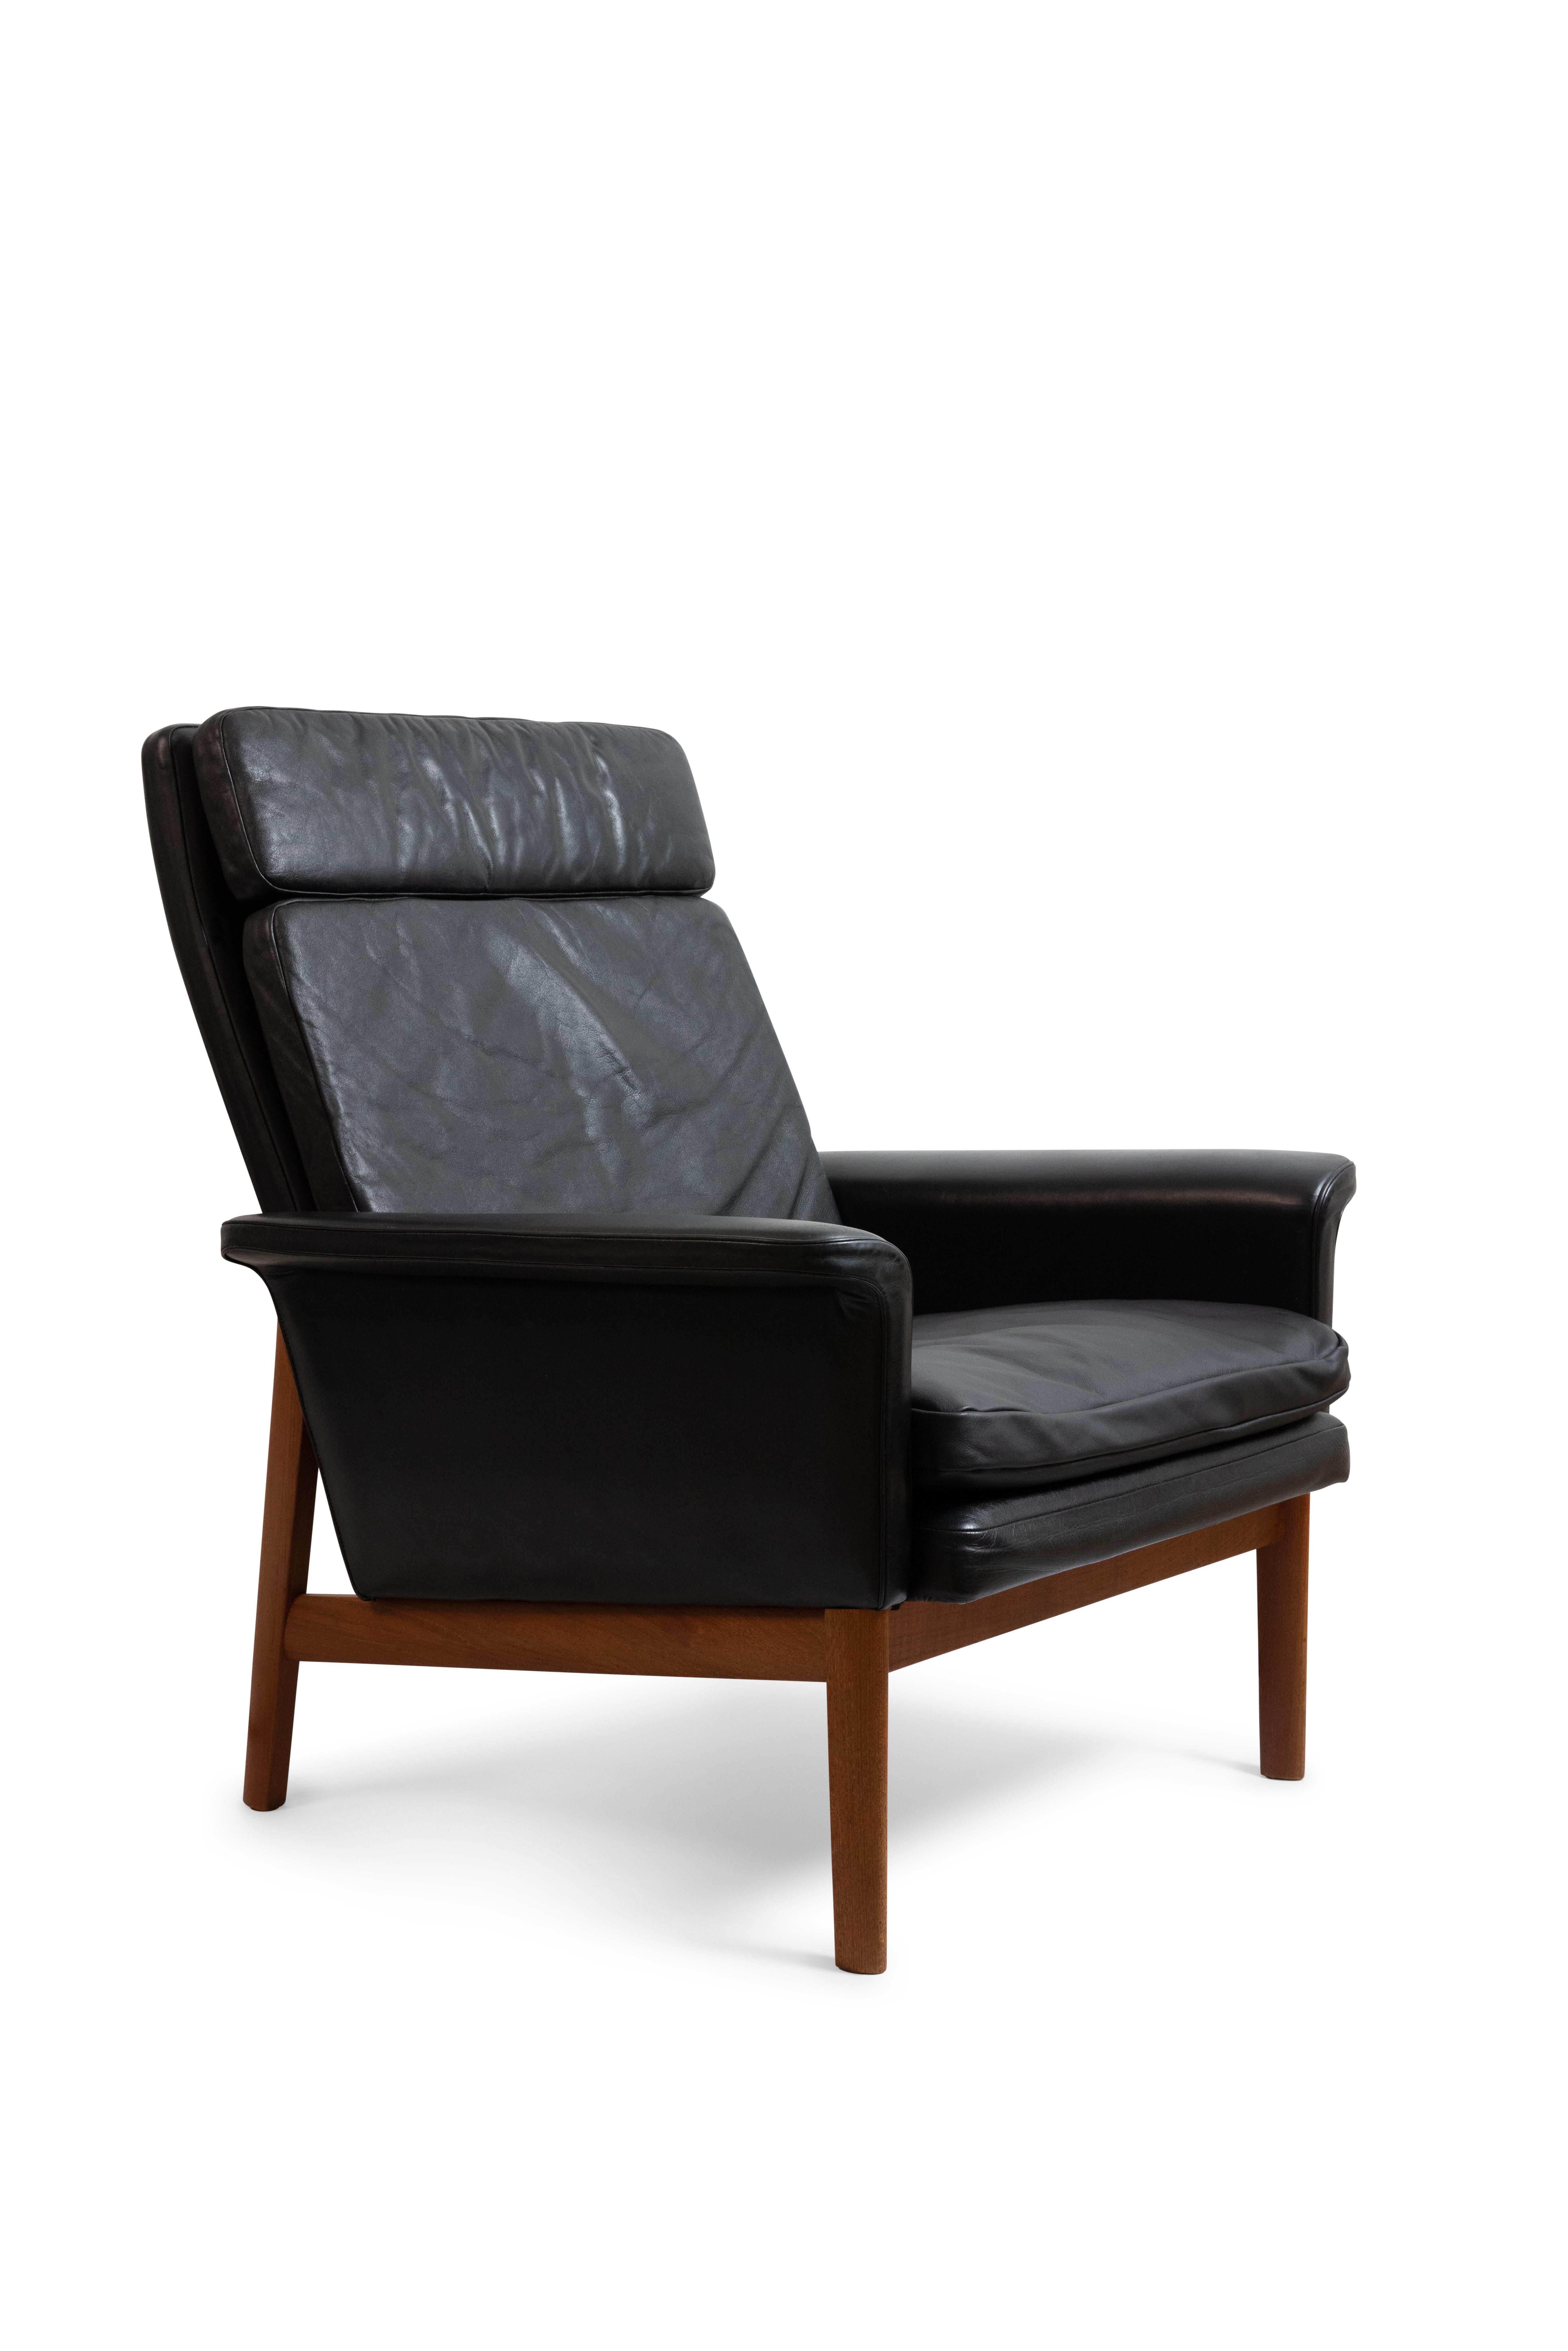 Finn Juhl lounge highback chair with original black leather upholstery with a wonderful patina. 

Frame of solid teak.

Model 218 from the Jupiter Series, made by France & Daverkosen.